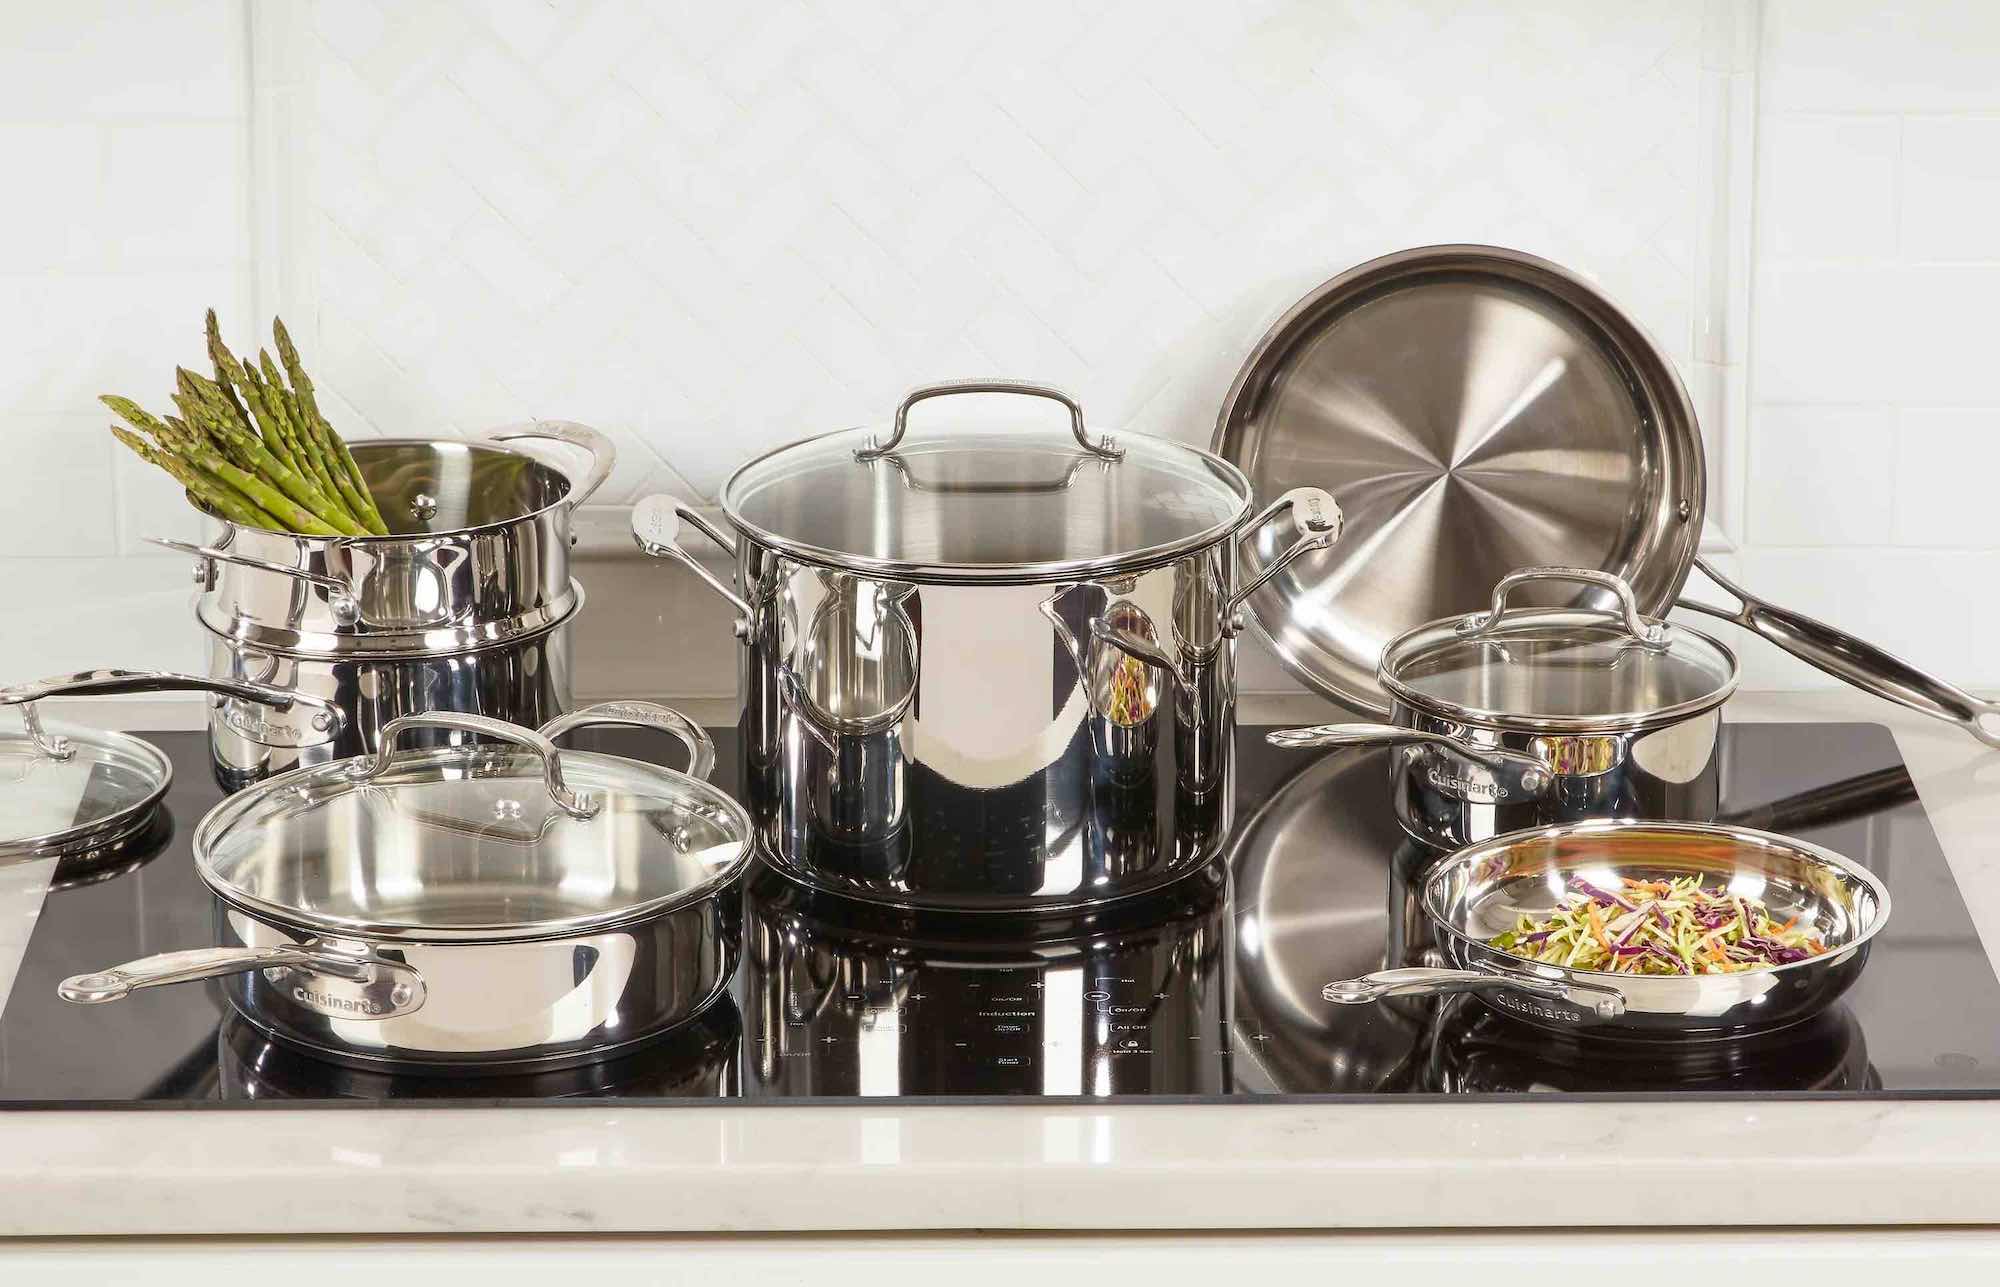 Pans buying guide - how to buy the best cookware for your kitchen